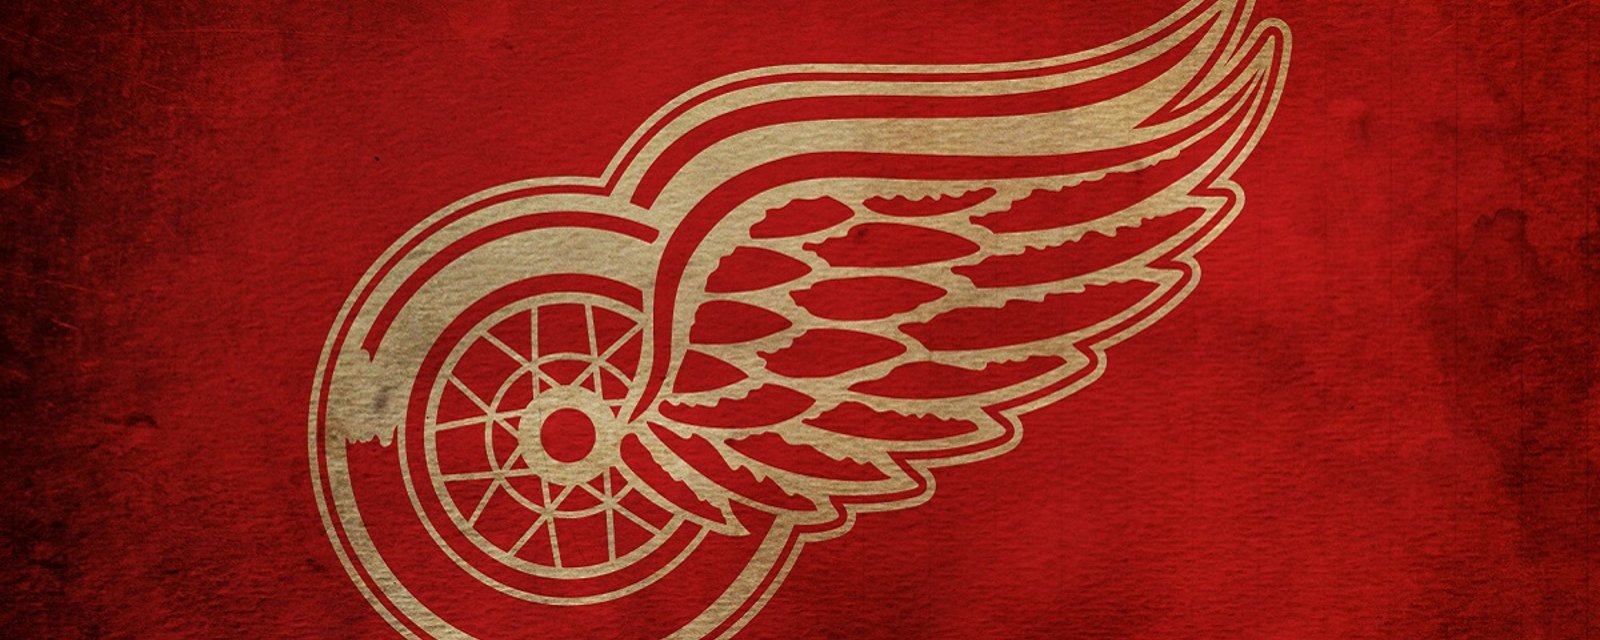 Breaking: Red Wings have made a major trade offer. 